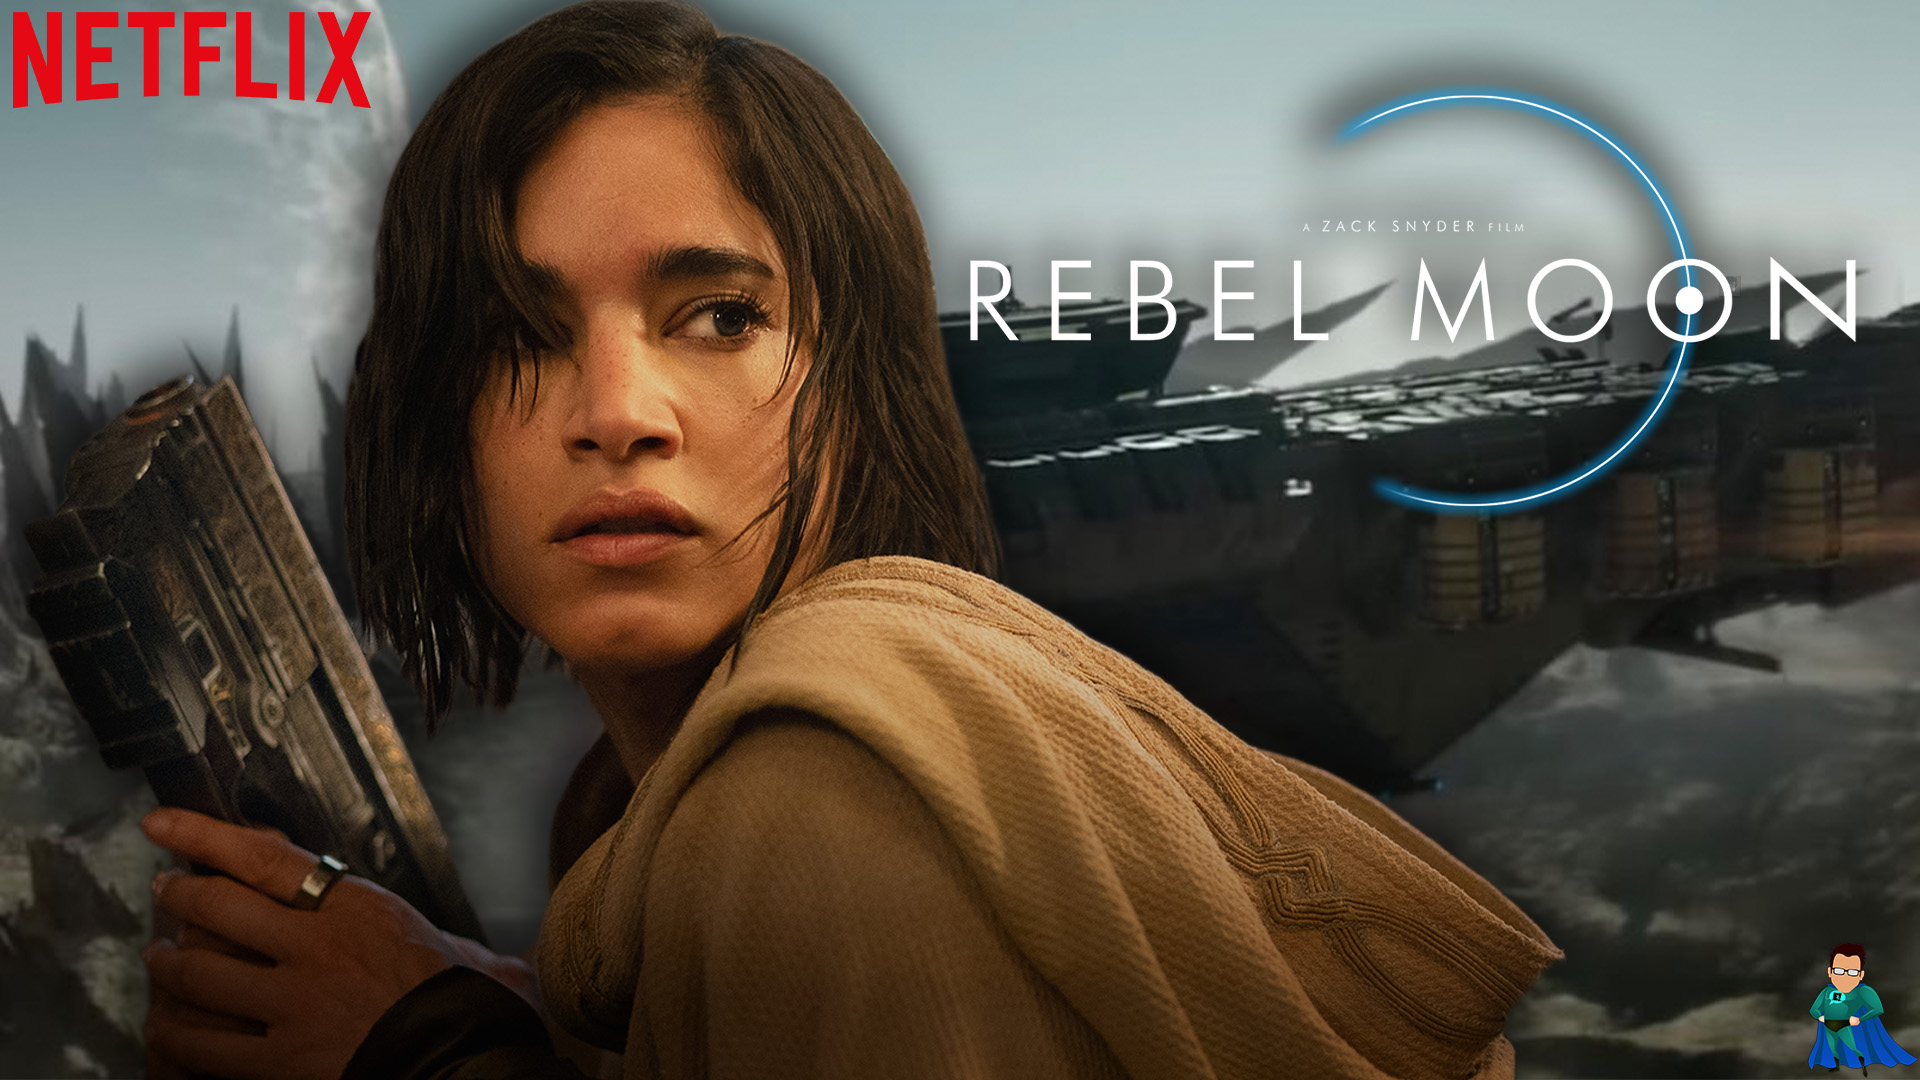 Rebel Moon teases its trailer release today with new shots